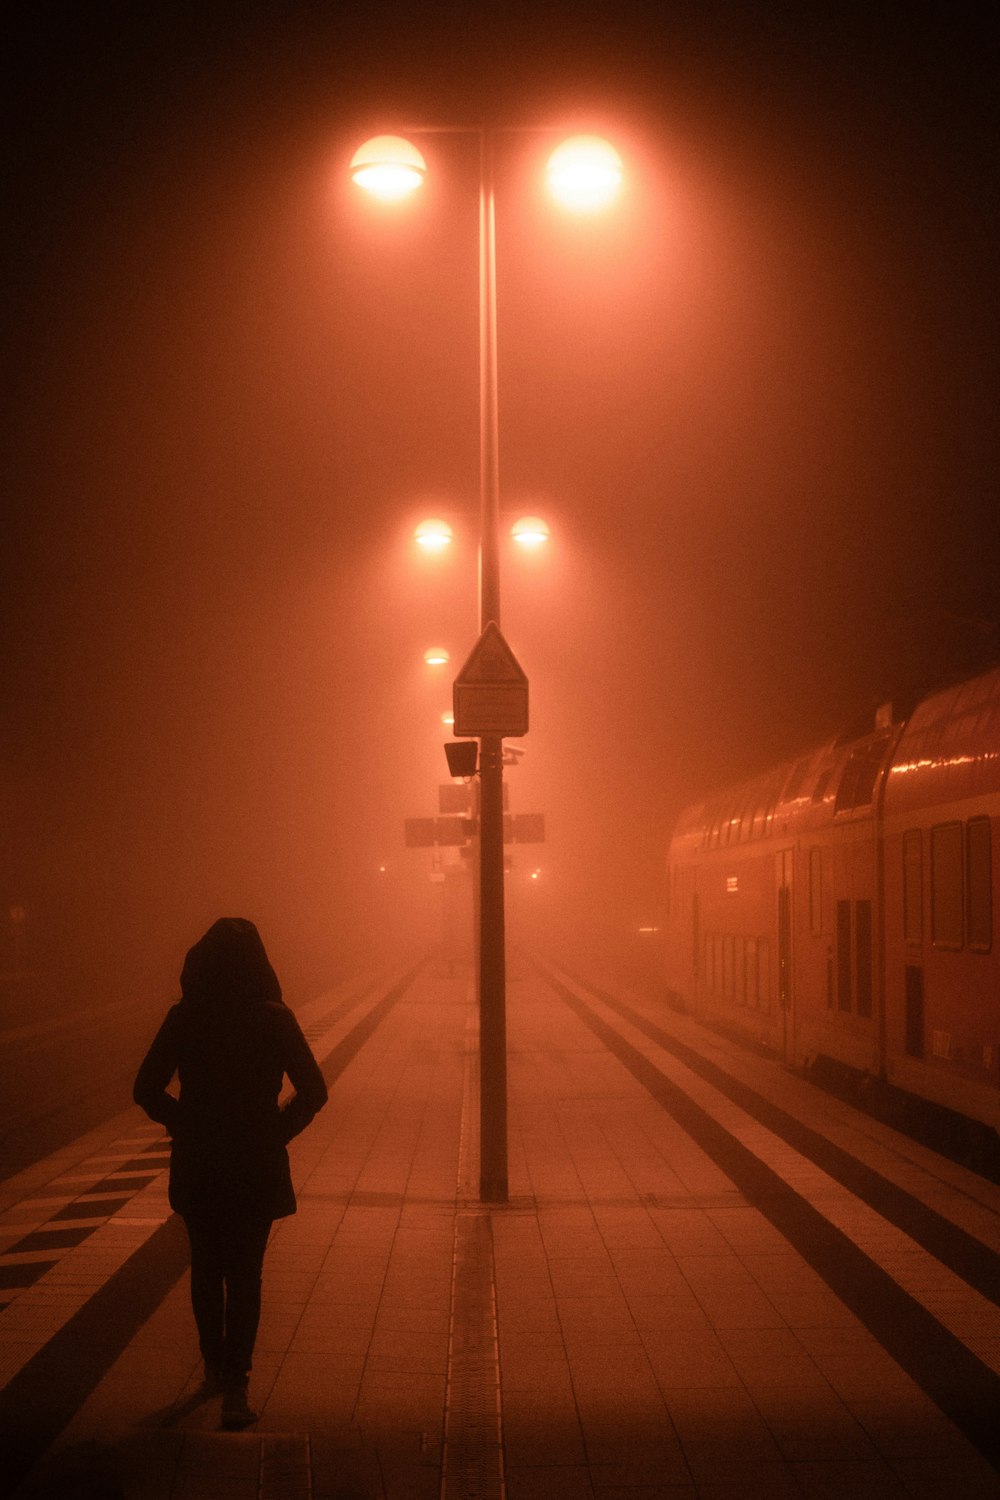 man in black jacket standing near train during night time